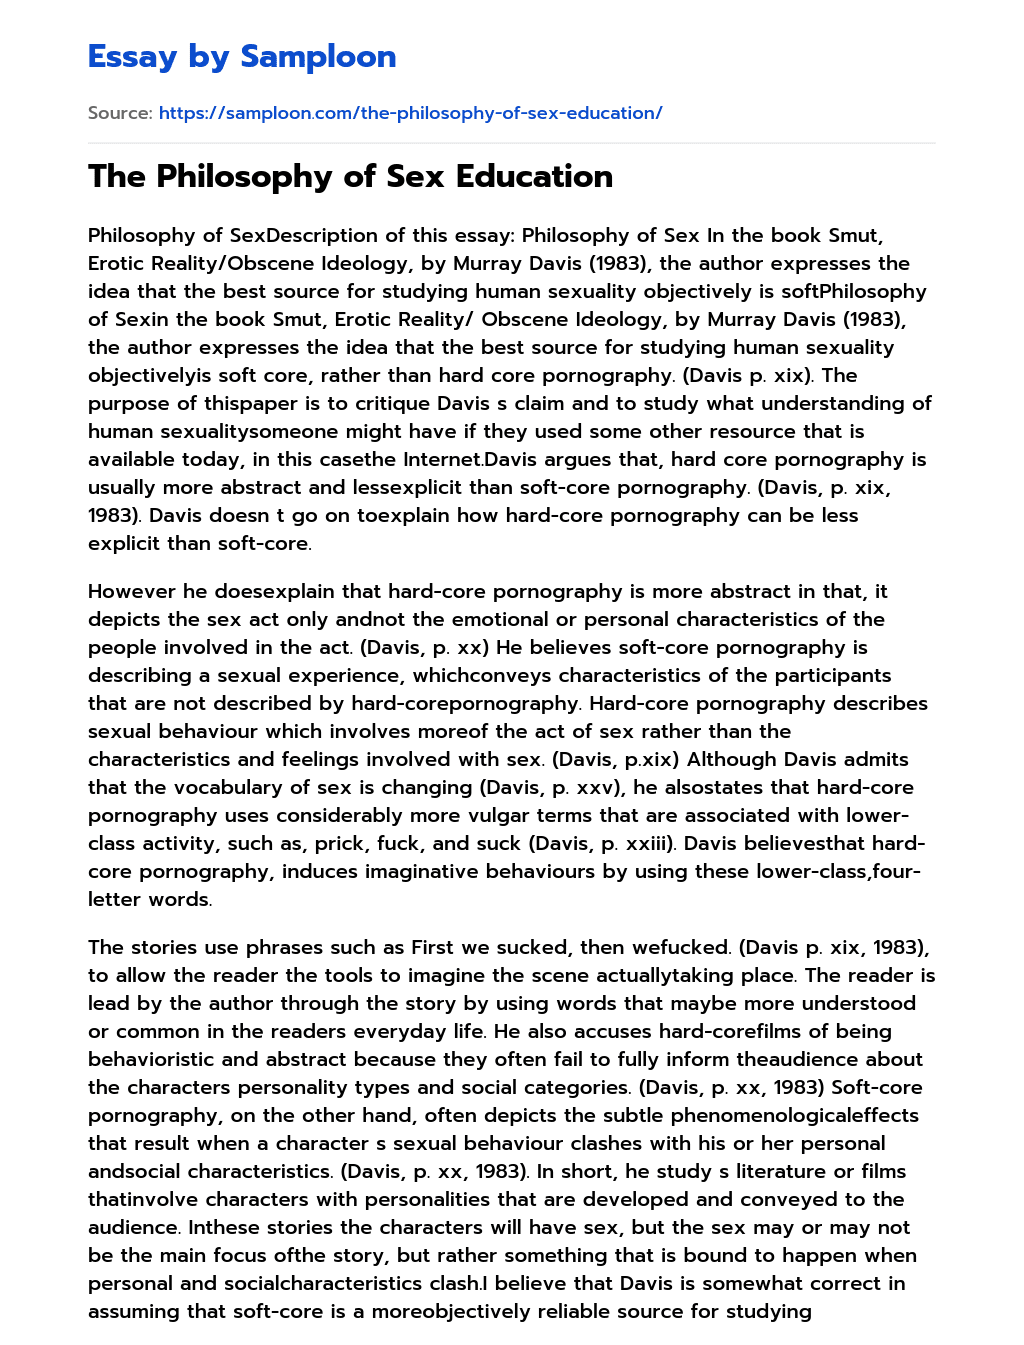 The Philosophy of Sex Education essay